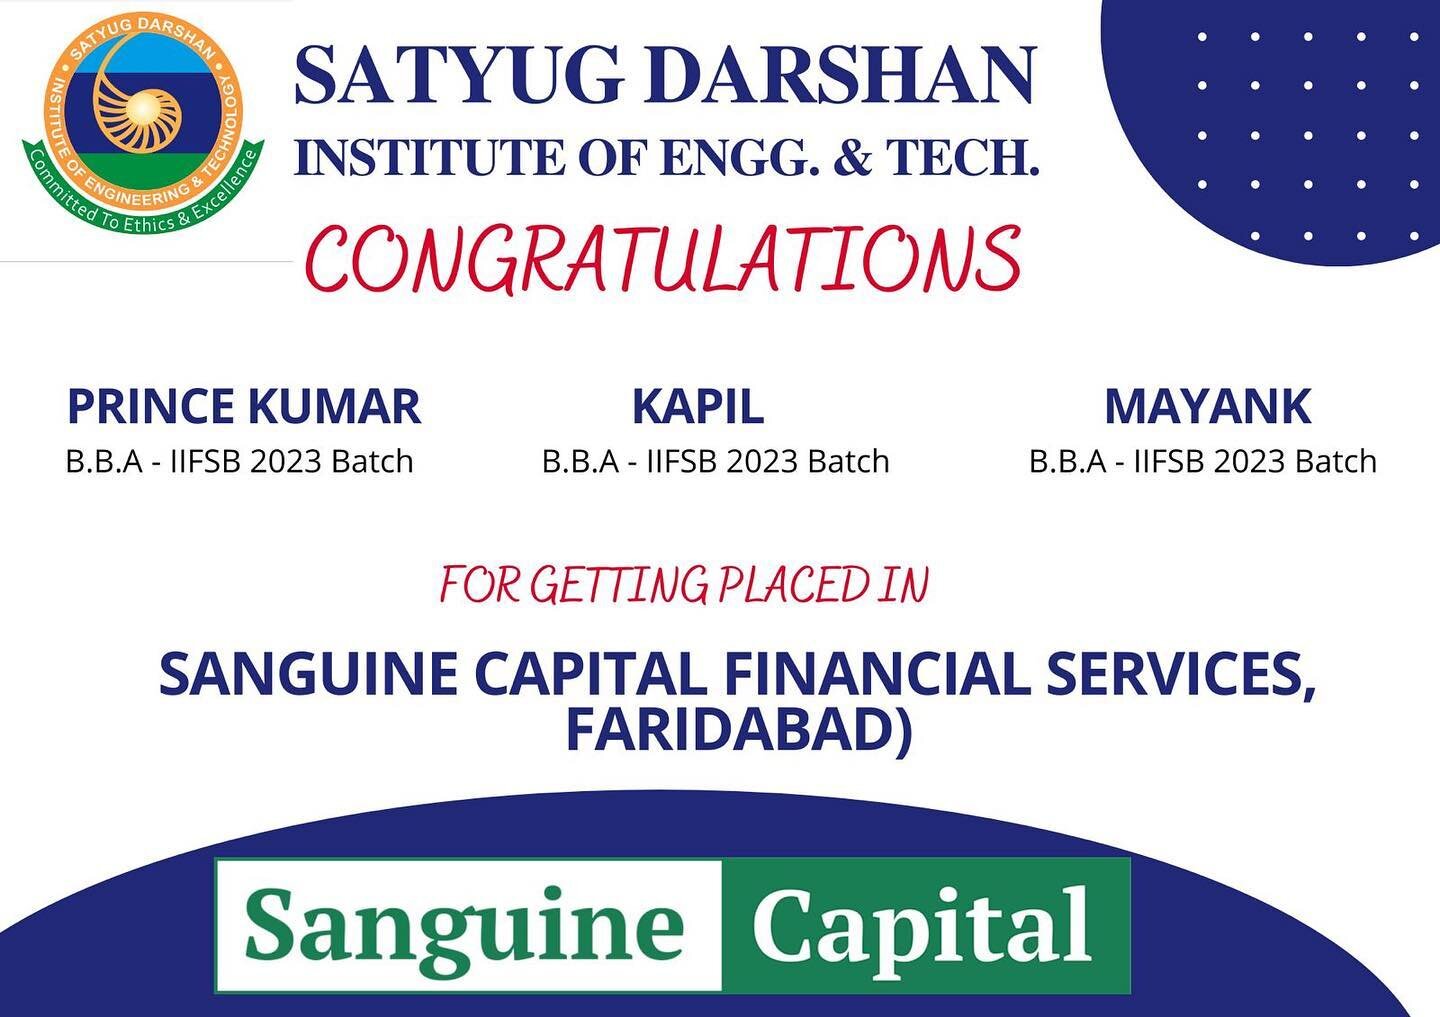 T&amp;P Cell SDIET along with Sanguine Capital Financial Services, Faridabad successfully conducted a CAMPUS PLACEMENT DRIVE on April 18, 2023 for BBA final year students where 3 students got successfully placed with below details- 
1. Prince Kumar :